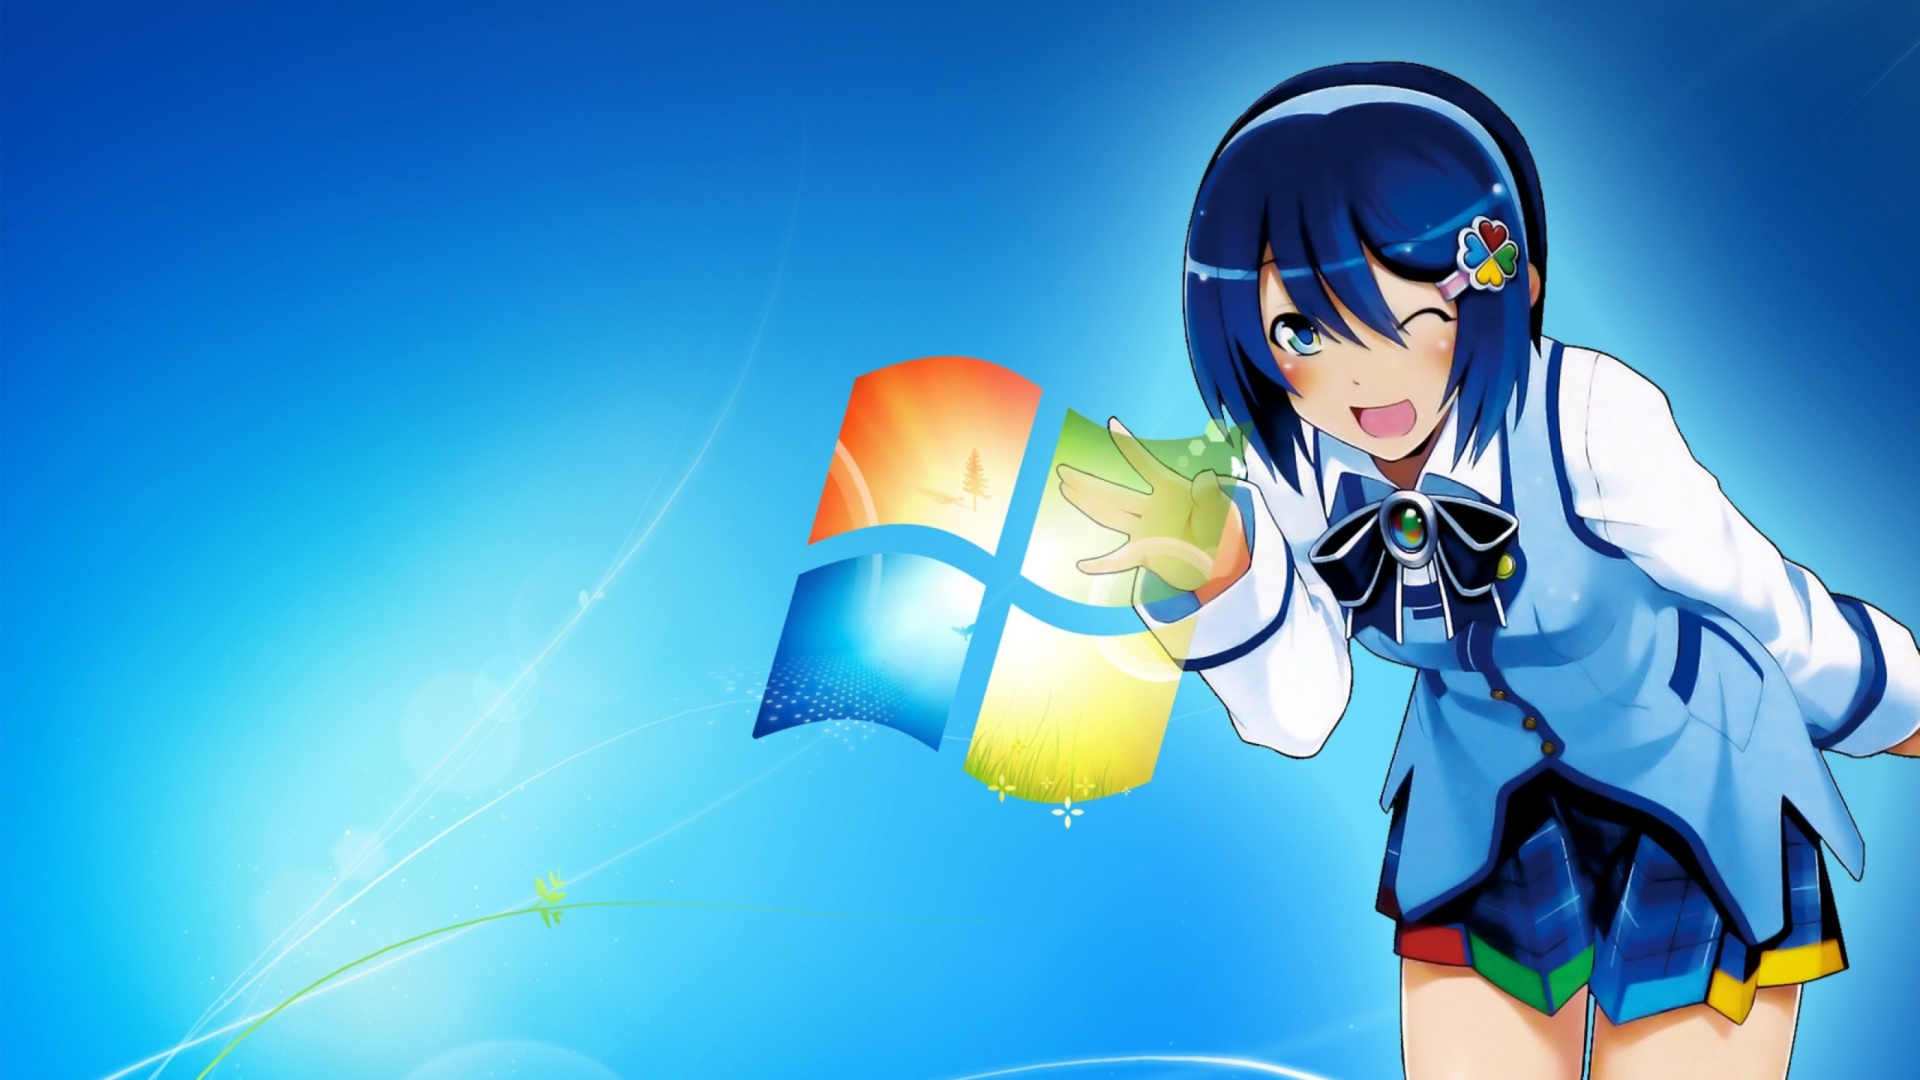 Woman in Blue and White School Uniform Anime Character. Wallpaper in 1920x1080 Resolution